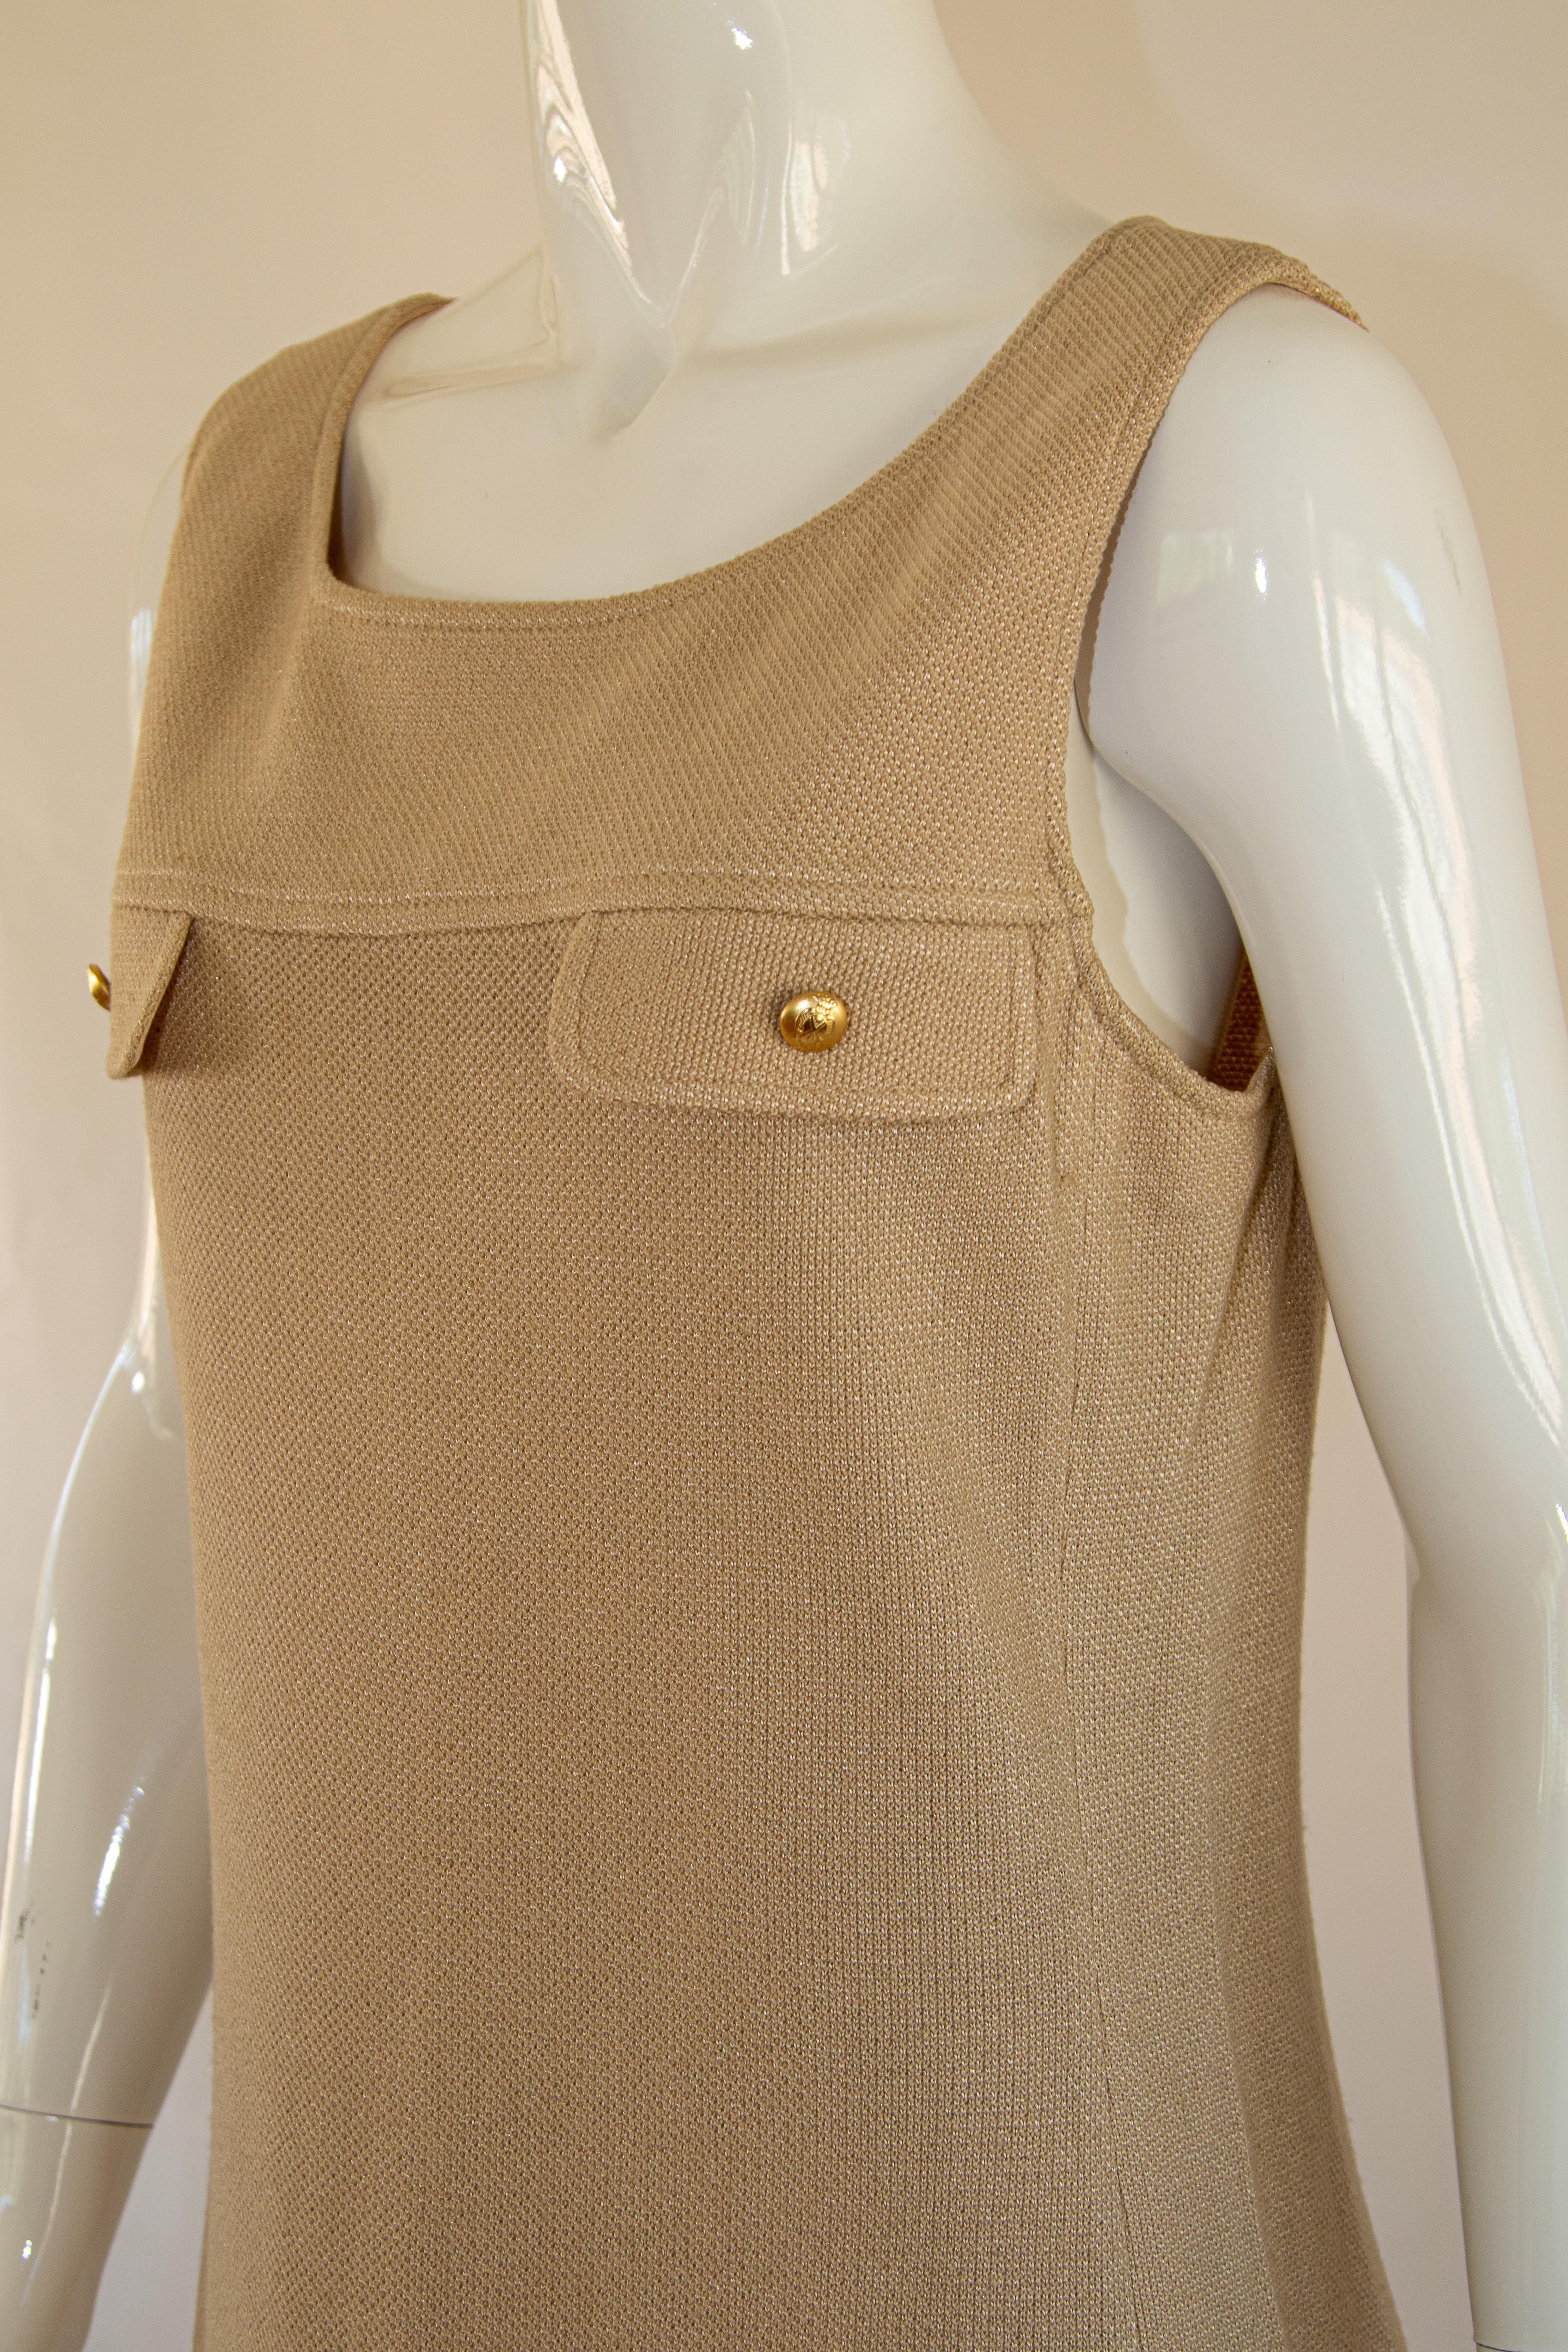 Brown Vintage St John Collection By Marie Gray Beige Knit Wool Mini Dress For Sale